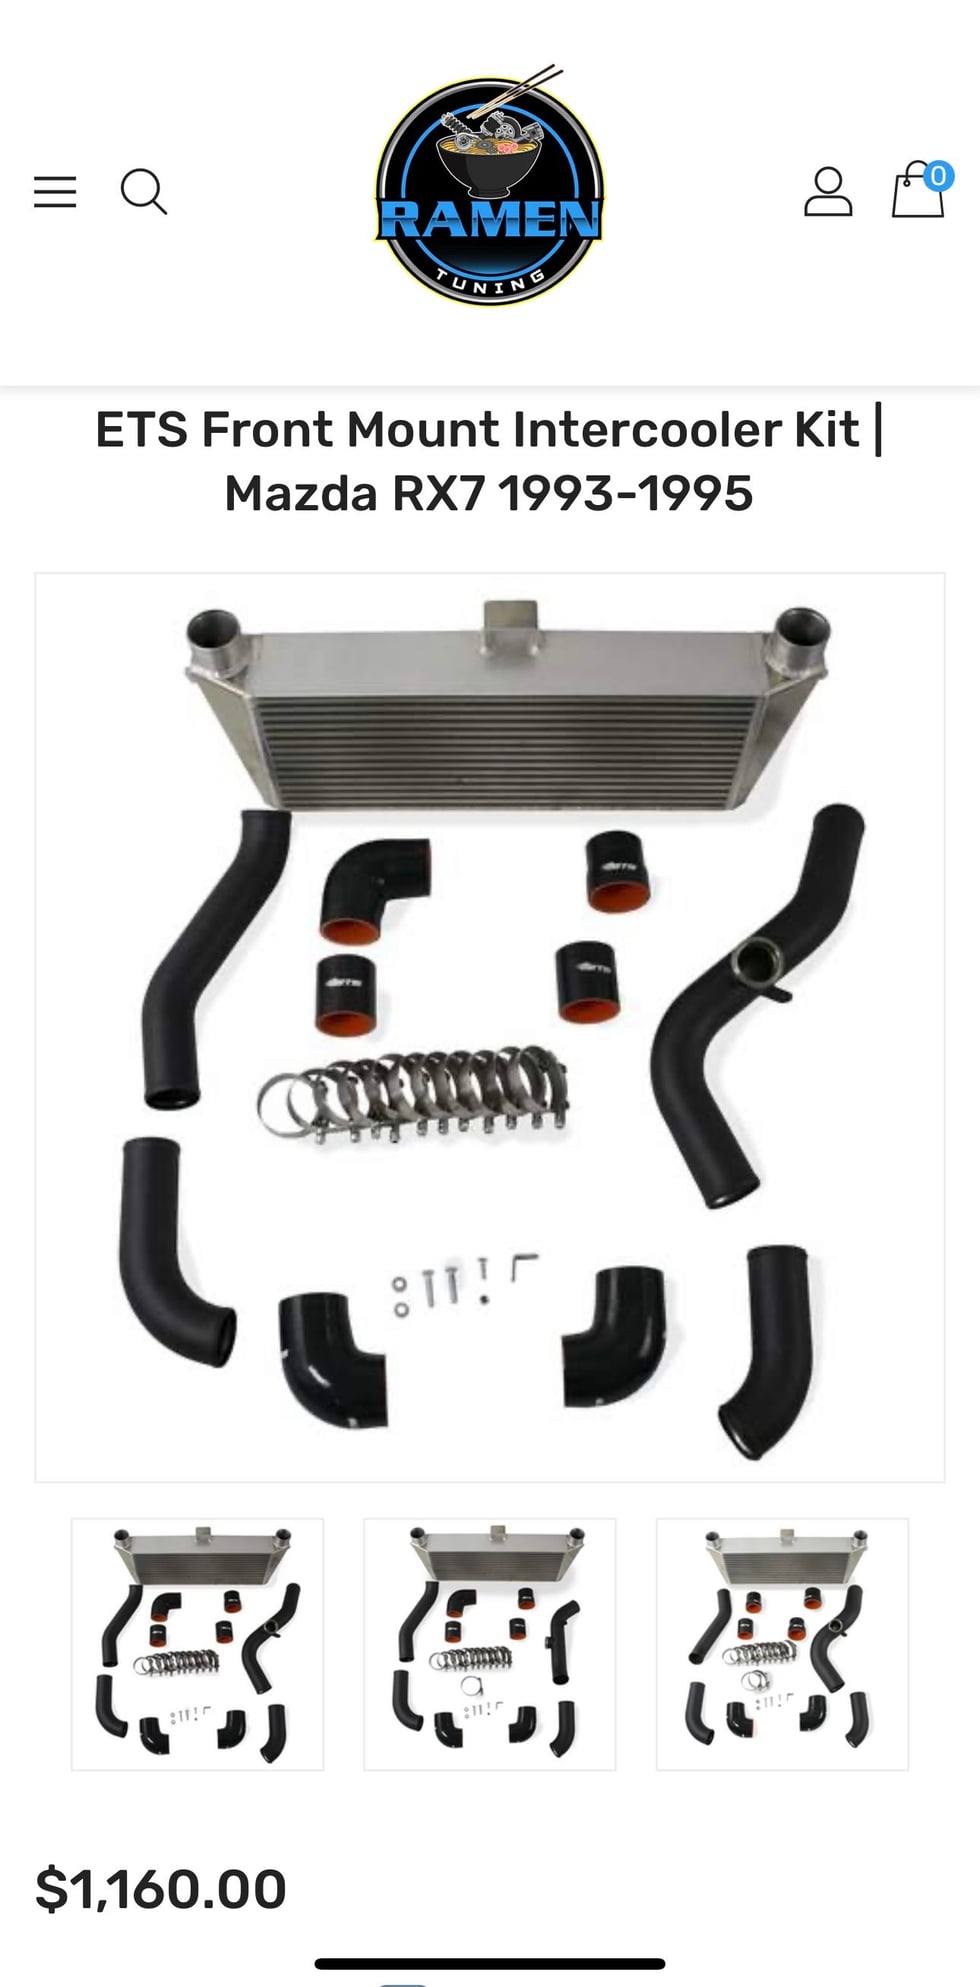 Engine - Intake/Fuel - WTS/WTT: Extreme Turbo Systems Intercooler Kit FD - Used - 1993 to 2002 Mazda RX-7 - San Antonio, TX 78253, United States